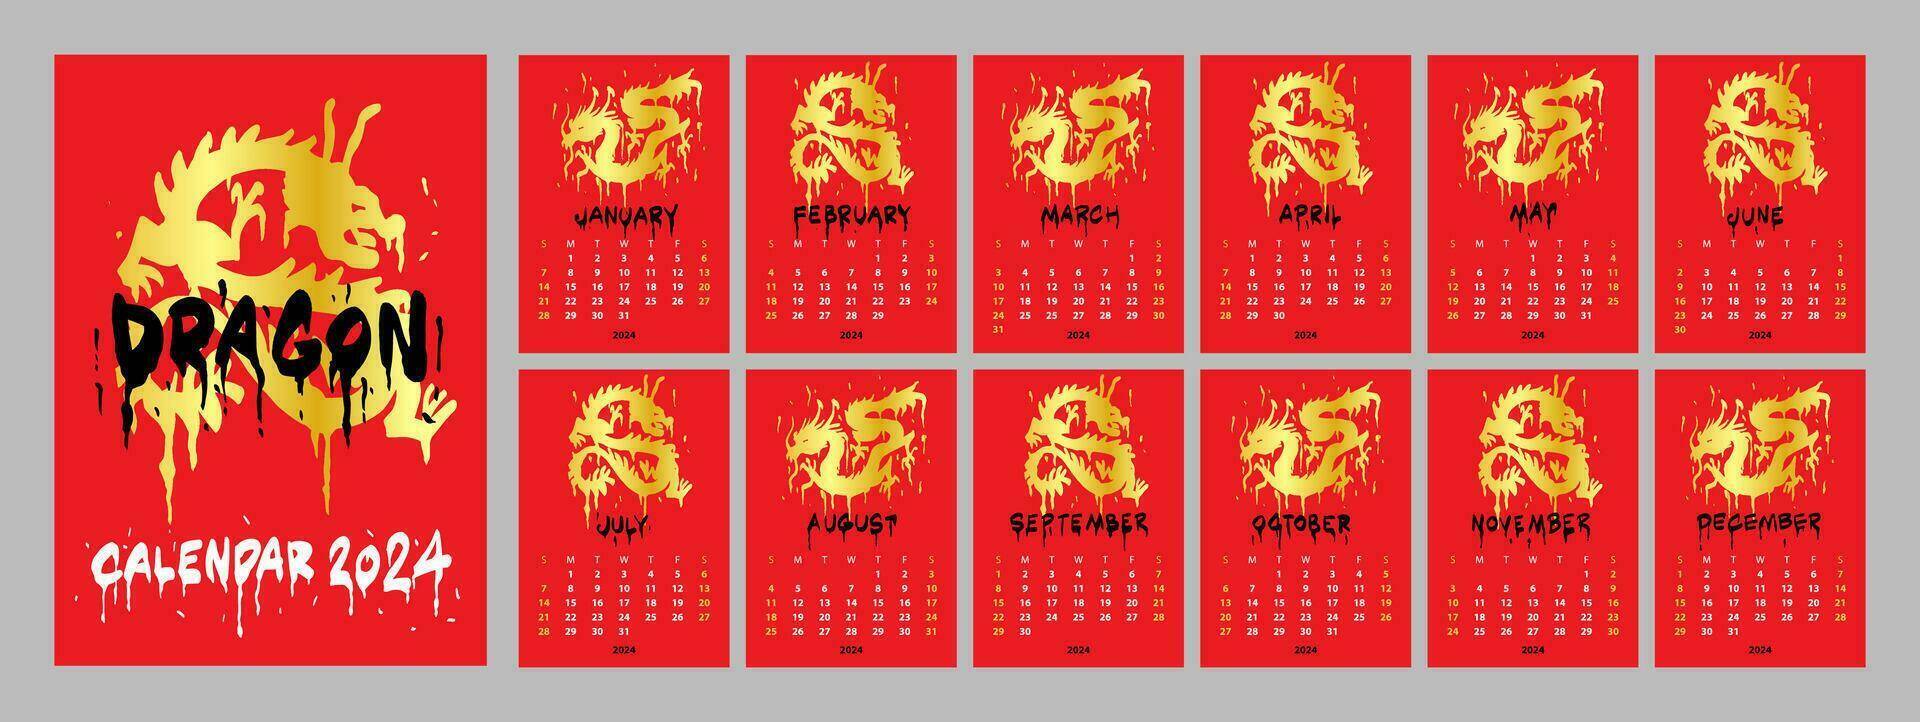 Calendar of 2024. Chinese Dragon New Year. Golden cool dragon on a red background. Graffiti and paint vector